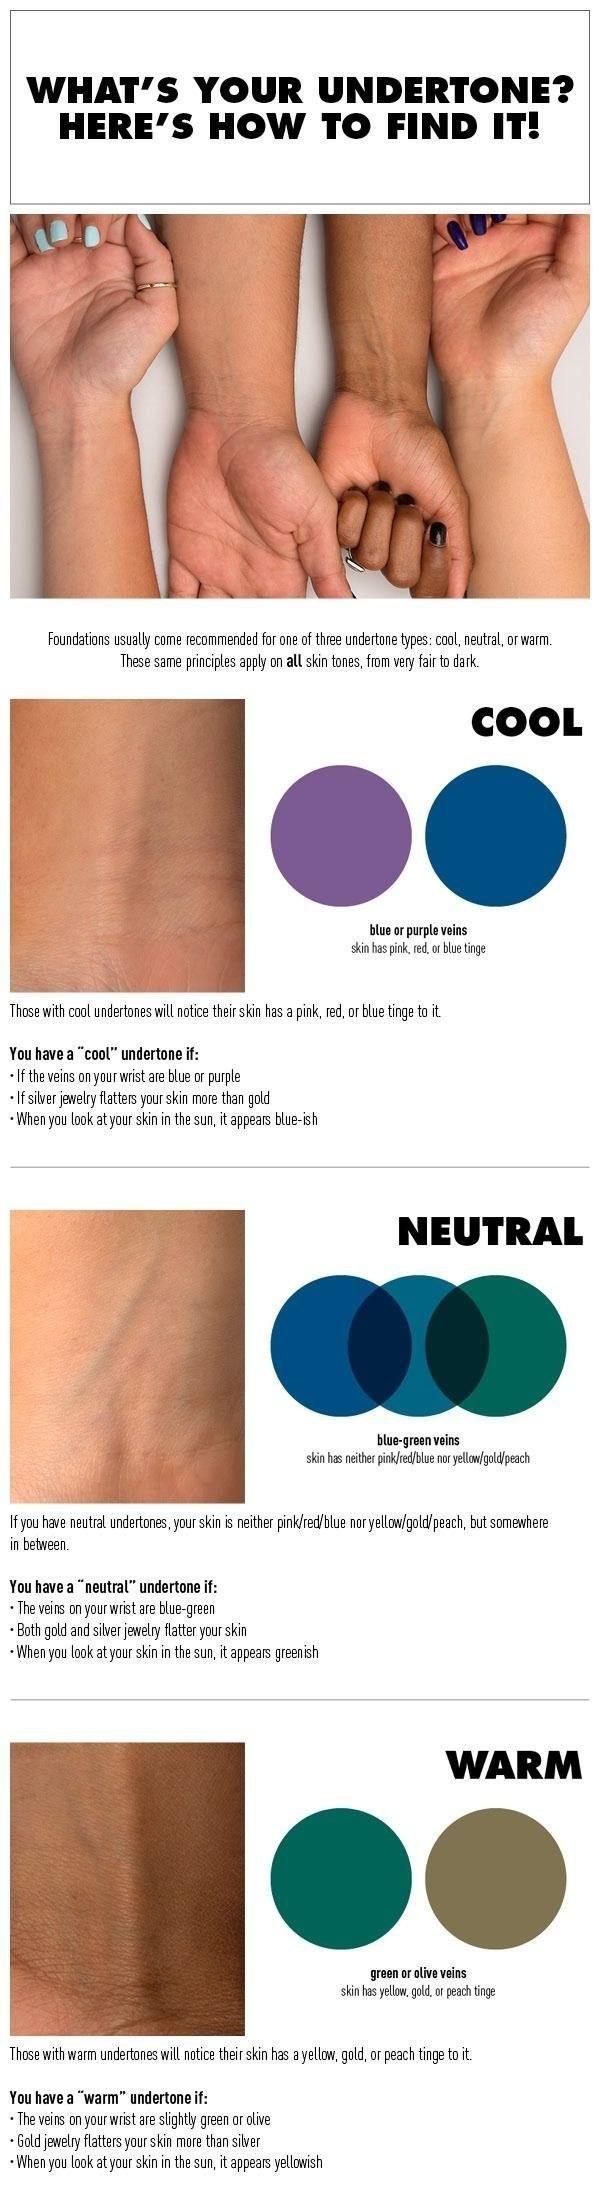 Knowing your undertone will help you find makeup colors that really suit you.